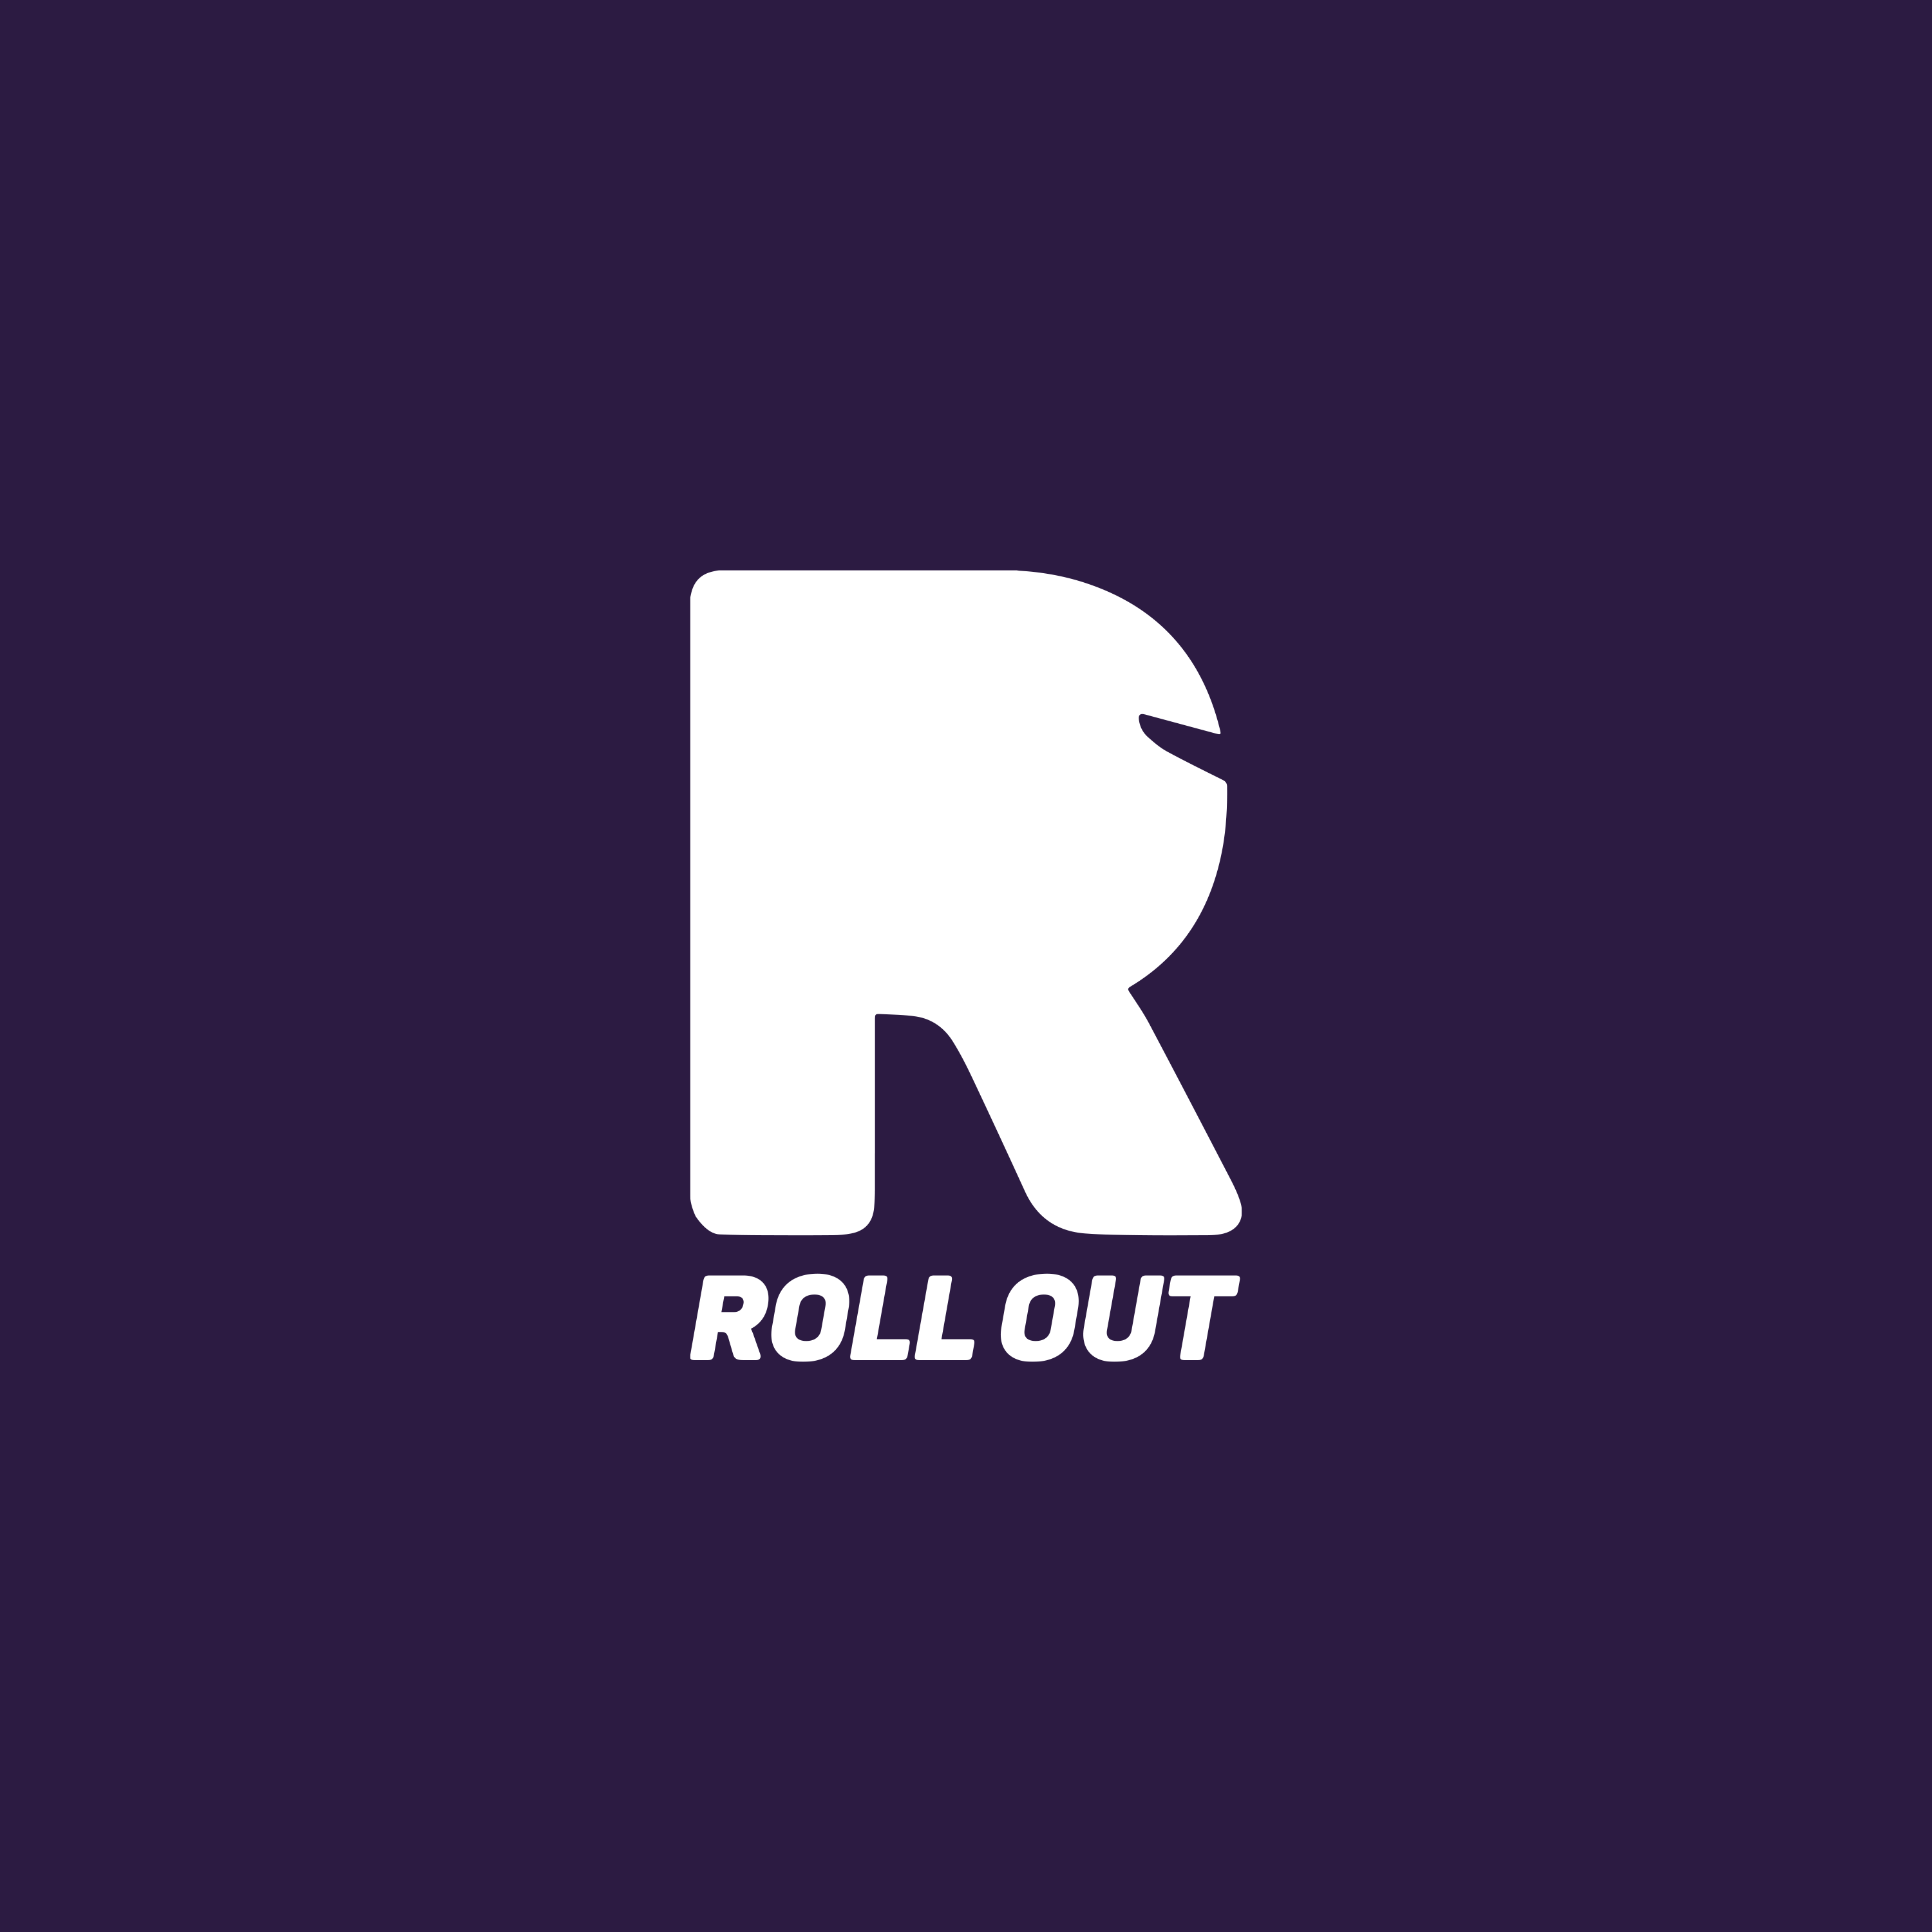 ROLL OUT AGENCY